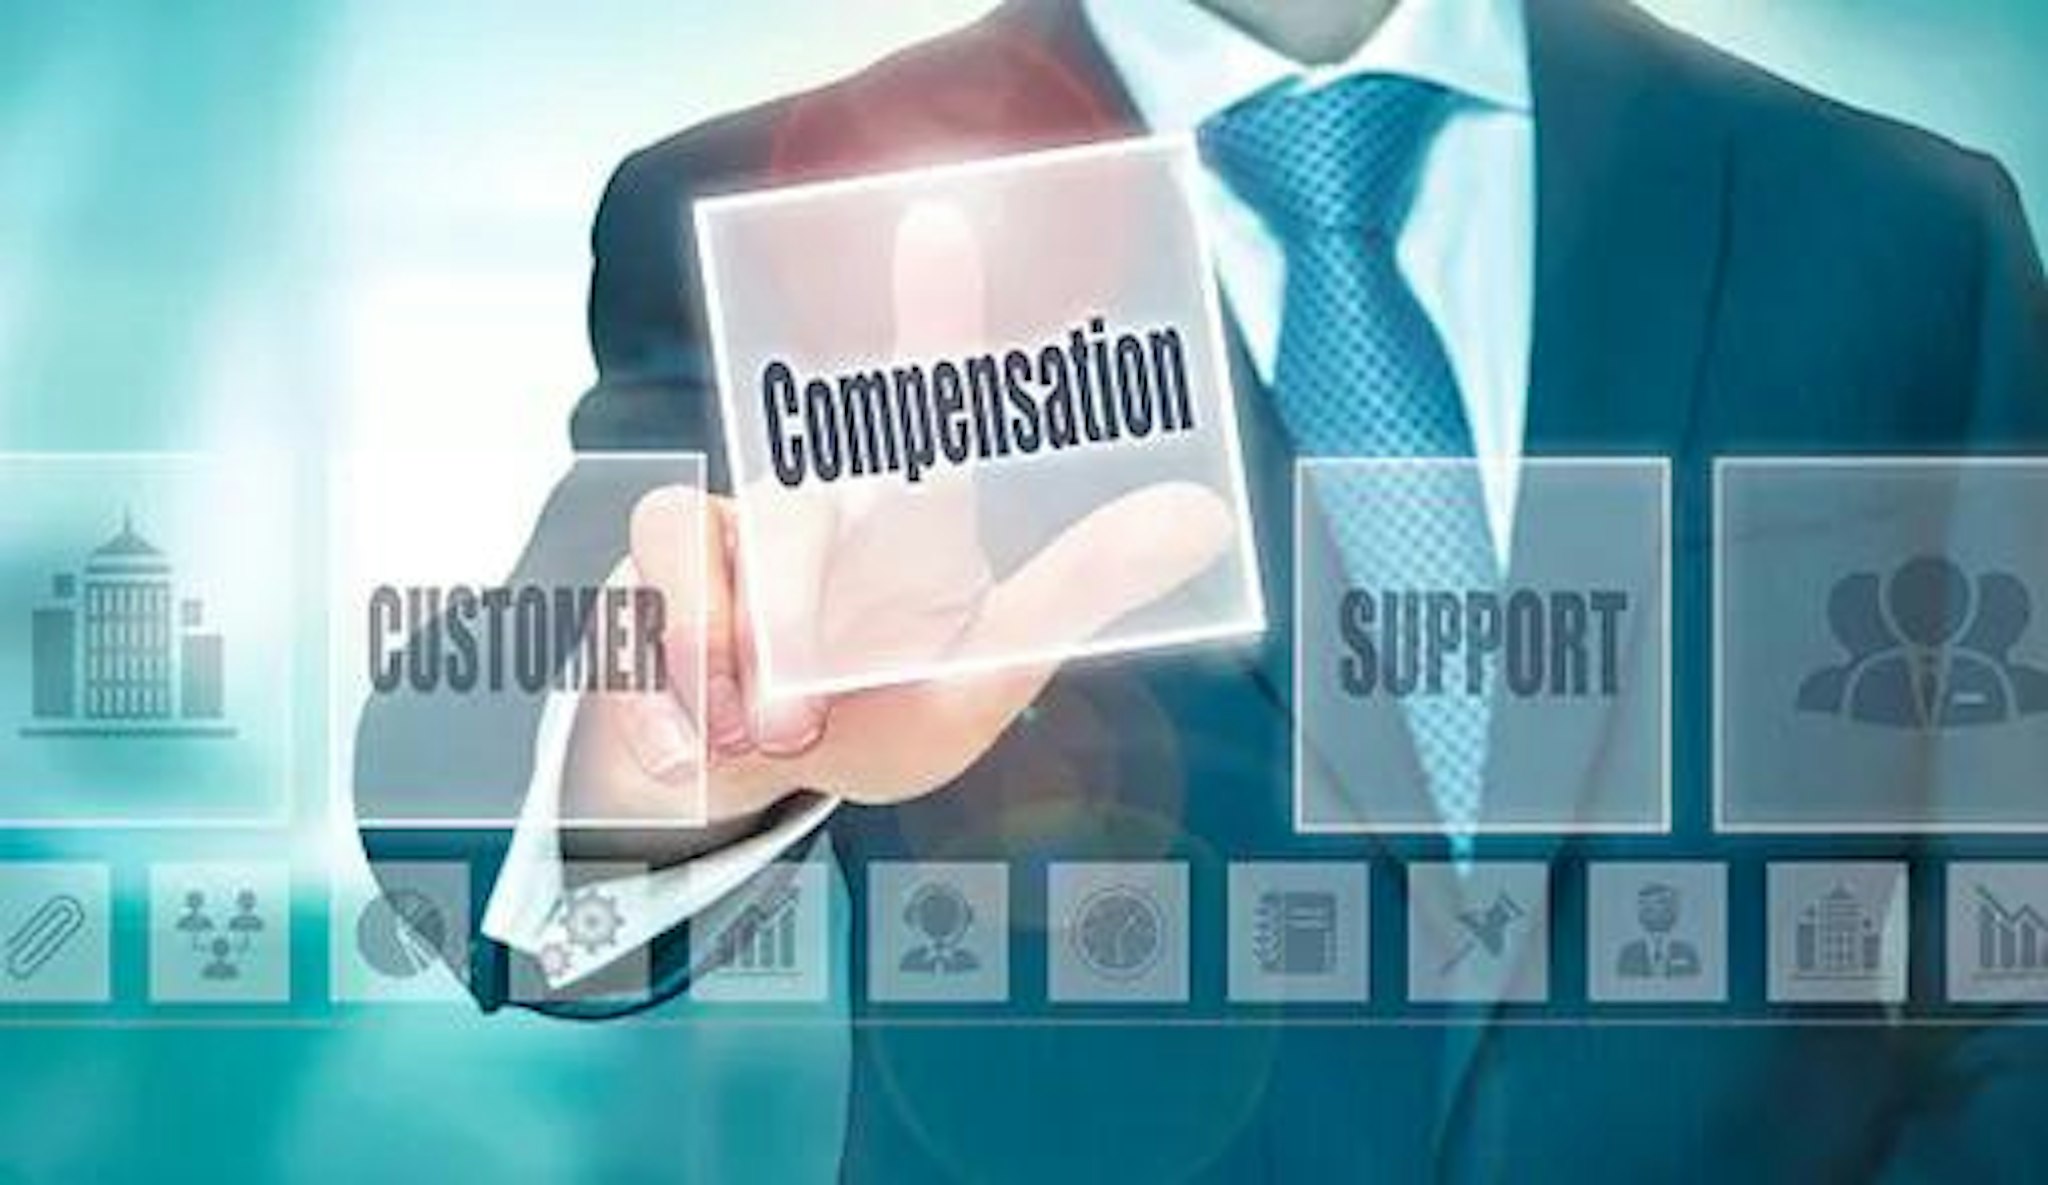 Illustration of man in suit selecting word from screen that says: customer, compensation, support 